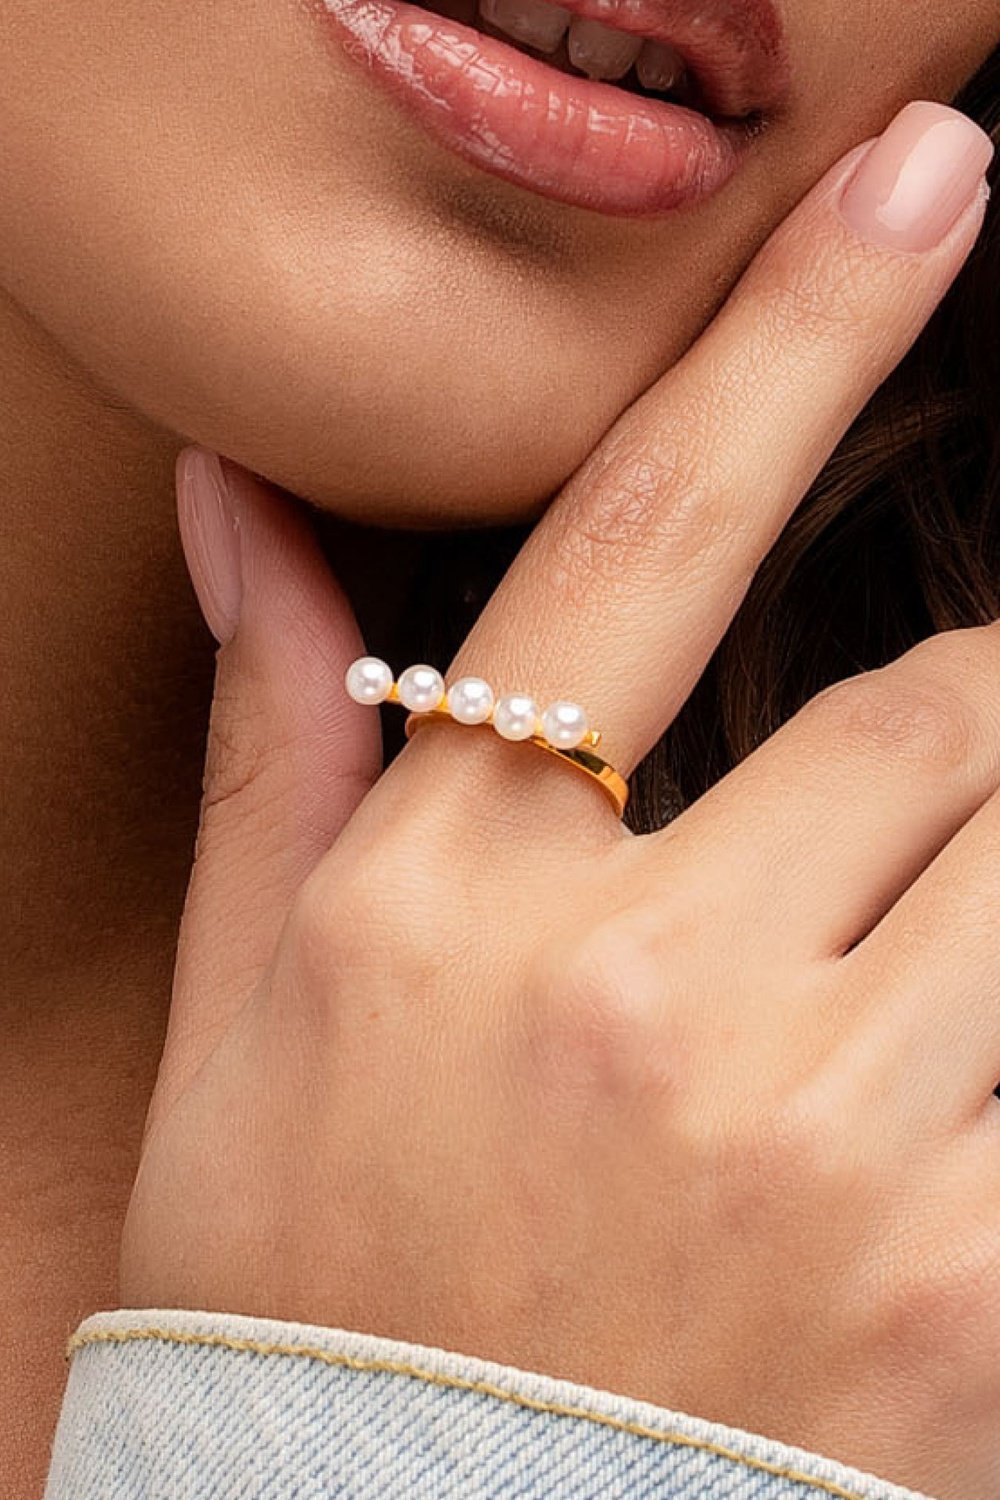 Five Pearls Ring